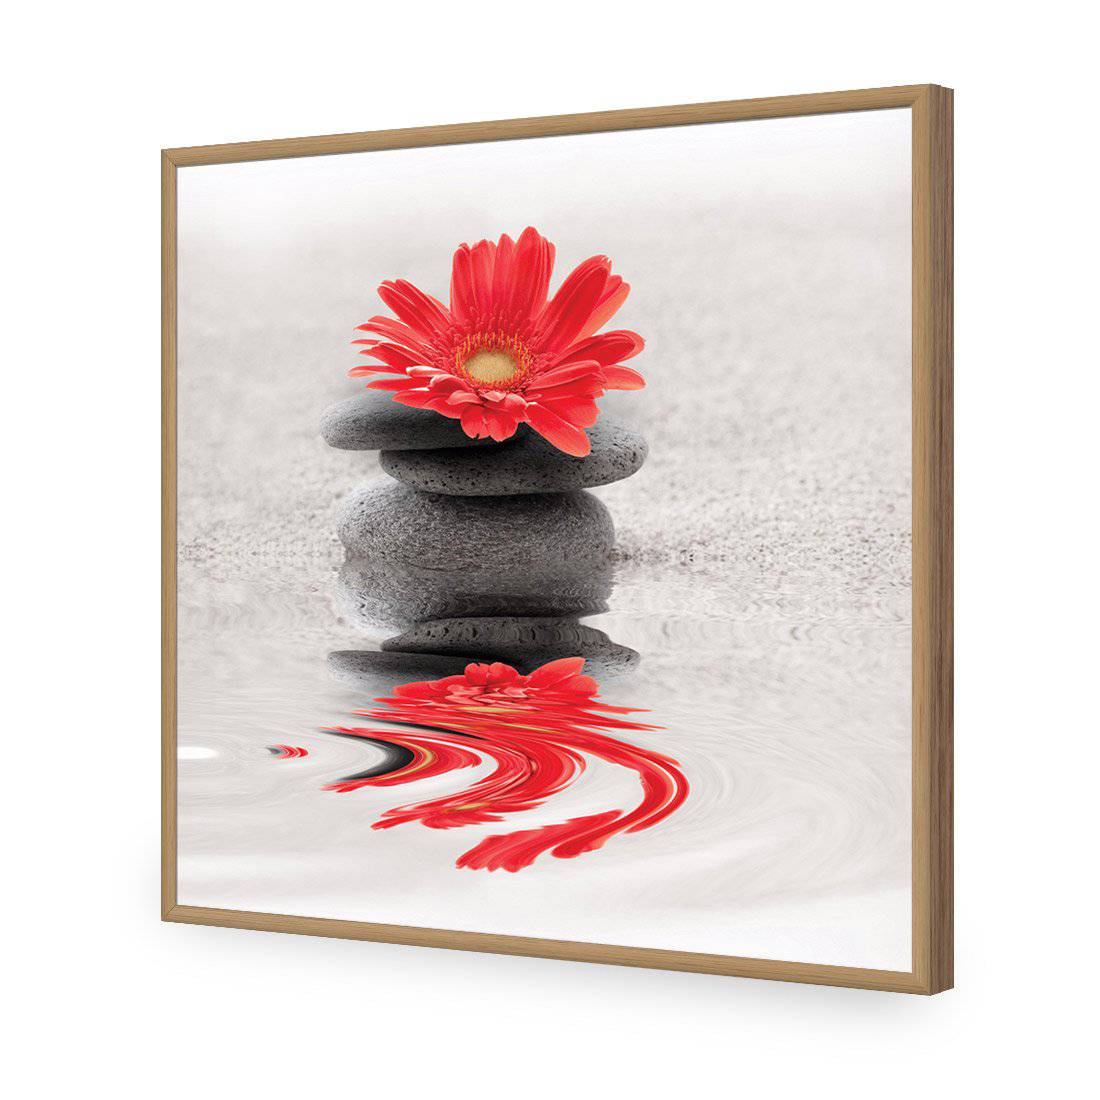 Red Flower Reflection, Square-Acrylic-Wall Art Design-Without Border-Acrylic - Oak Frame-37x37cm-Wall Art Designs